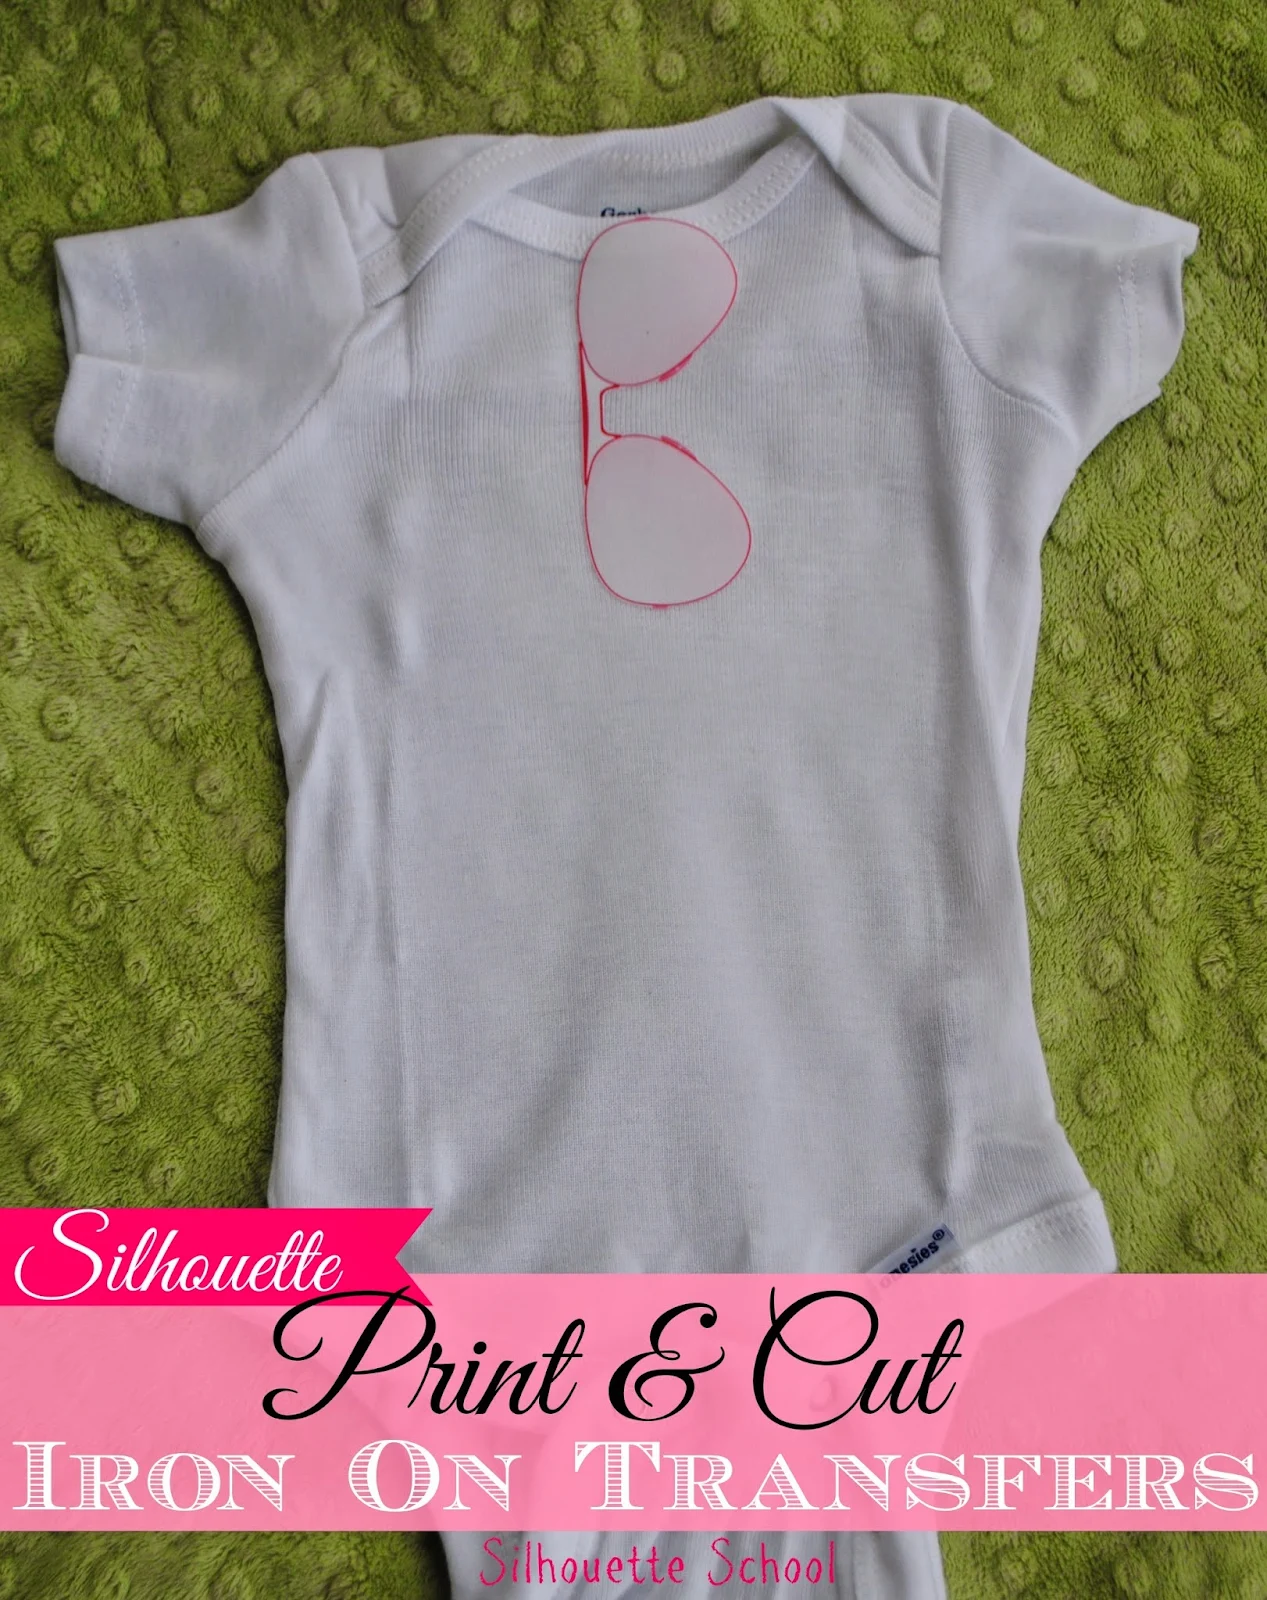 Silhouette, print and cut, heat transfer, iron on, Silhouette tutorial